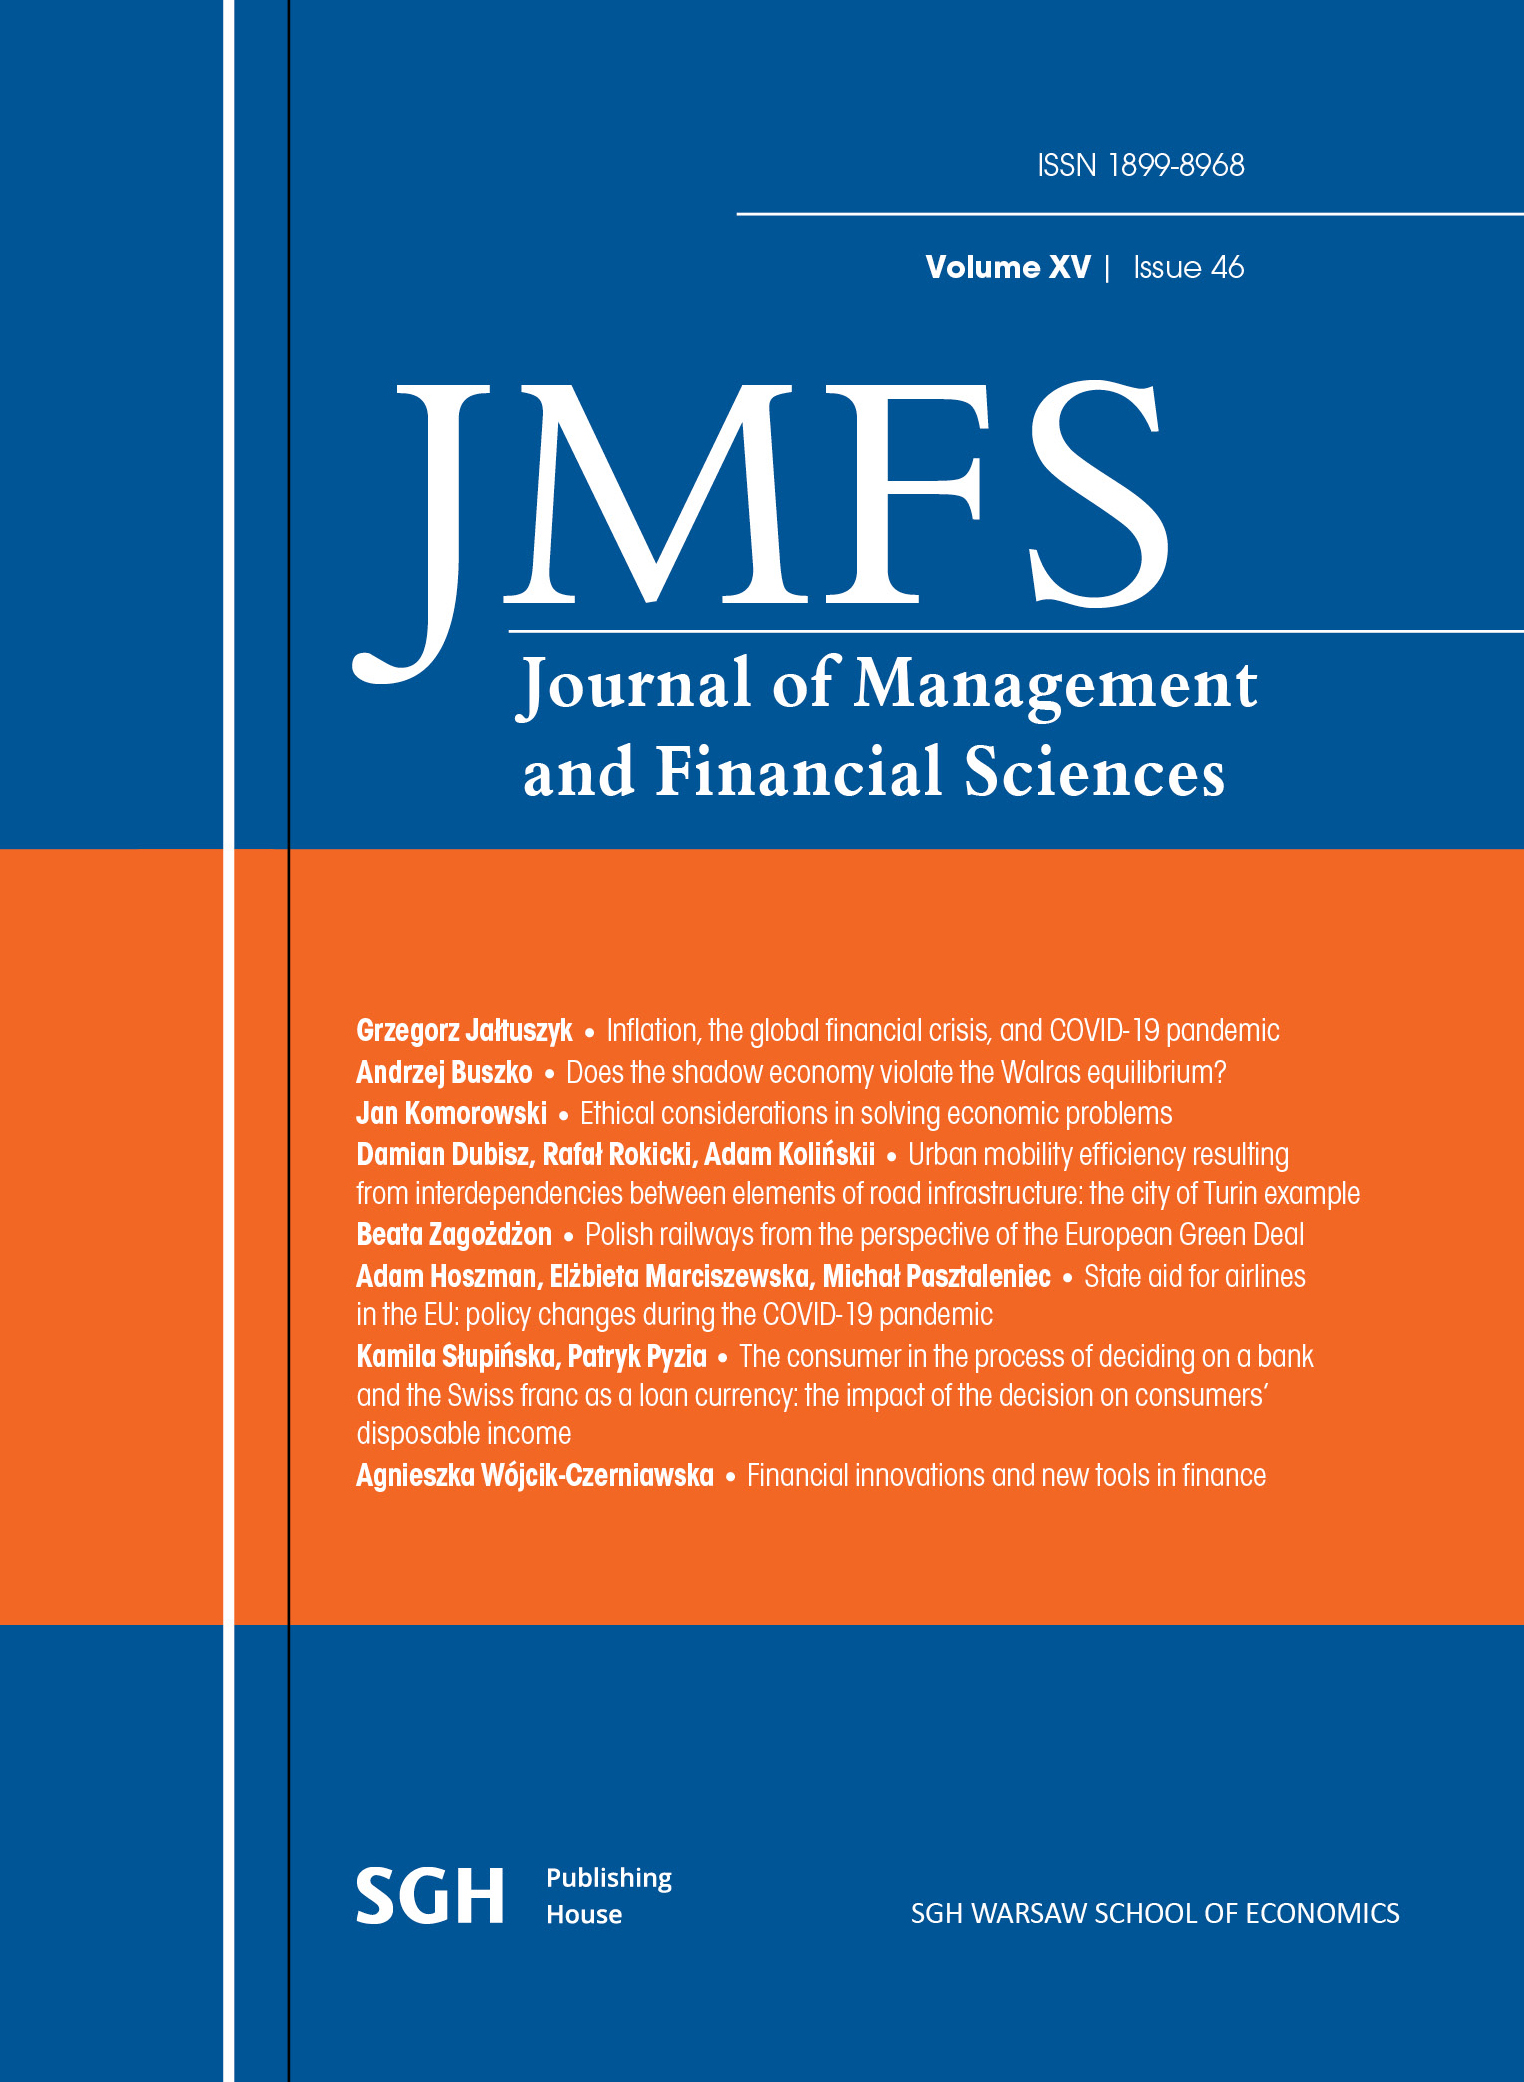 Financial innovations and new tools in finance Cover Image